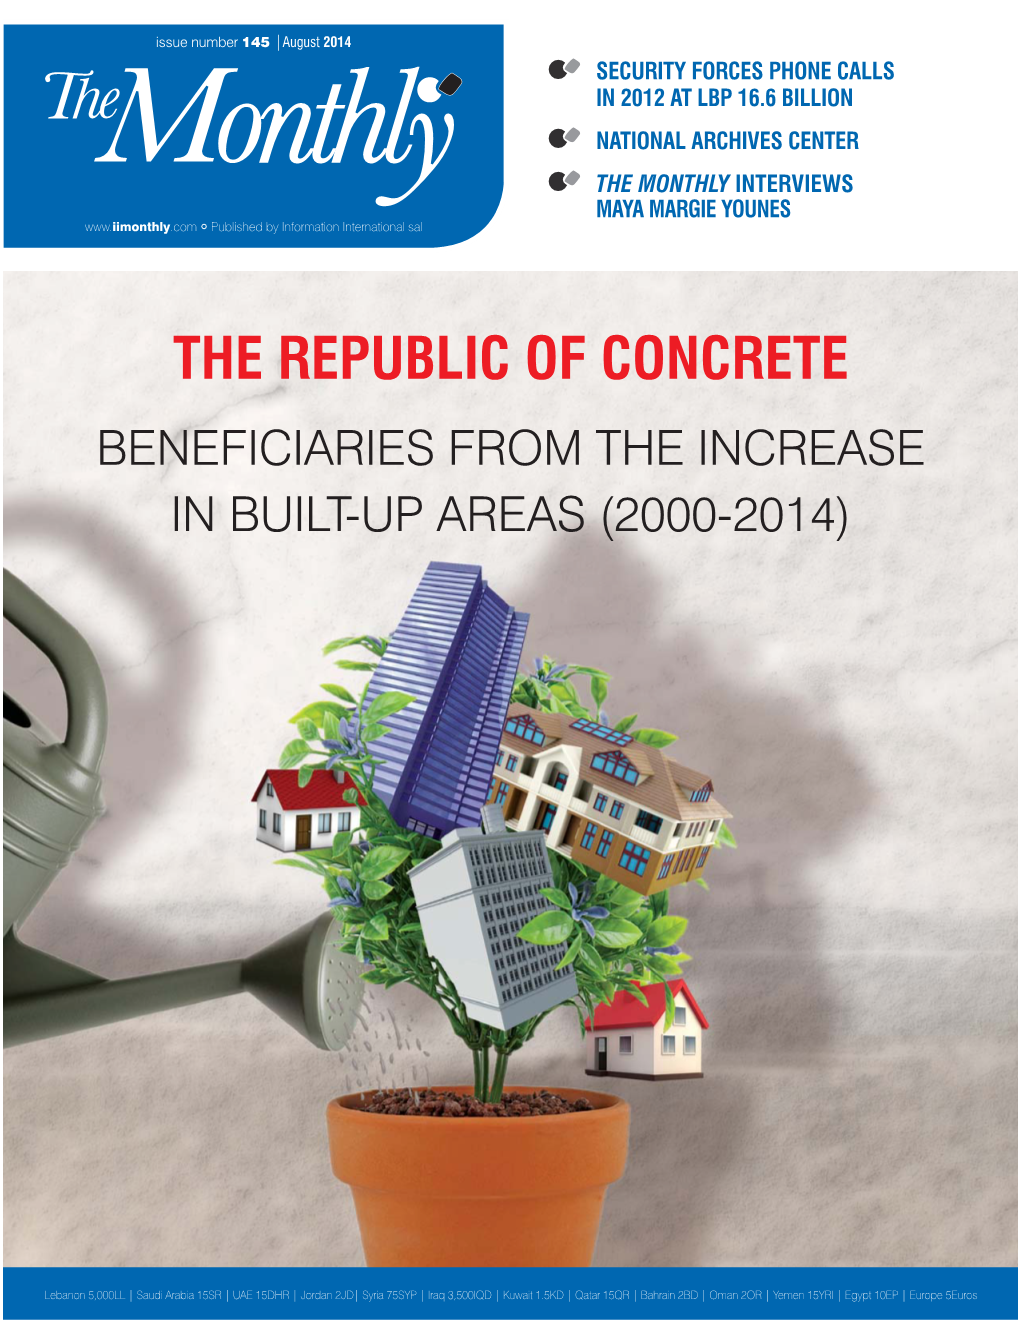 The Republic of Concrete Beneficiaries from the Increase in Built-Up Areas (2000-2014)